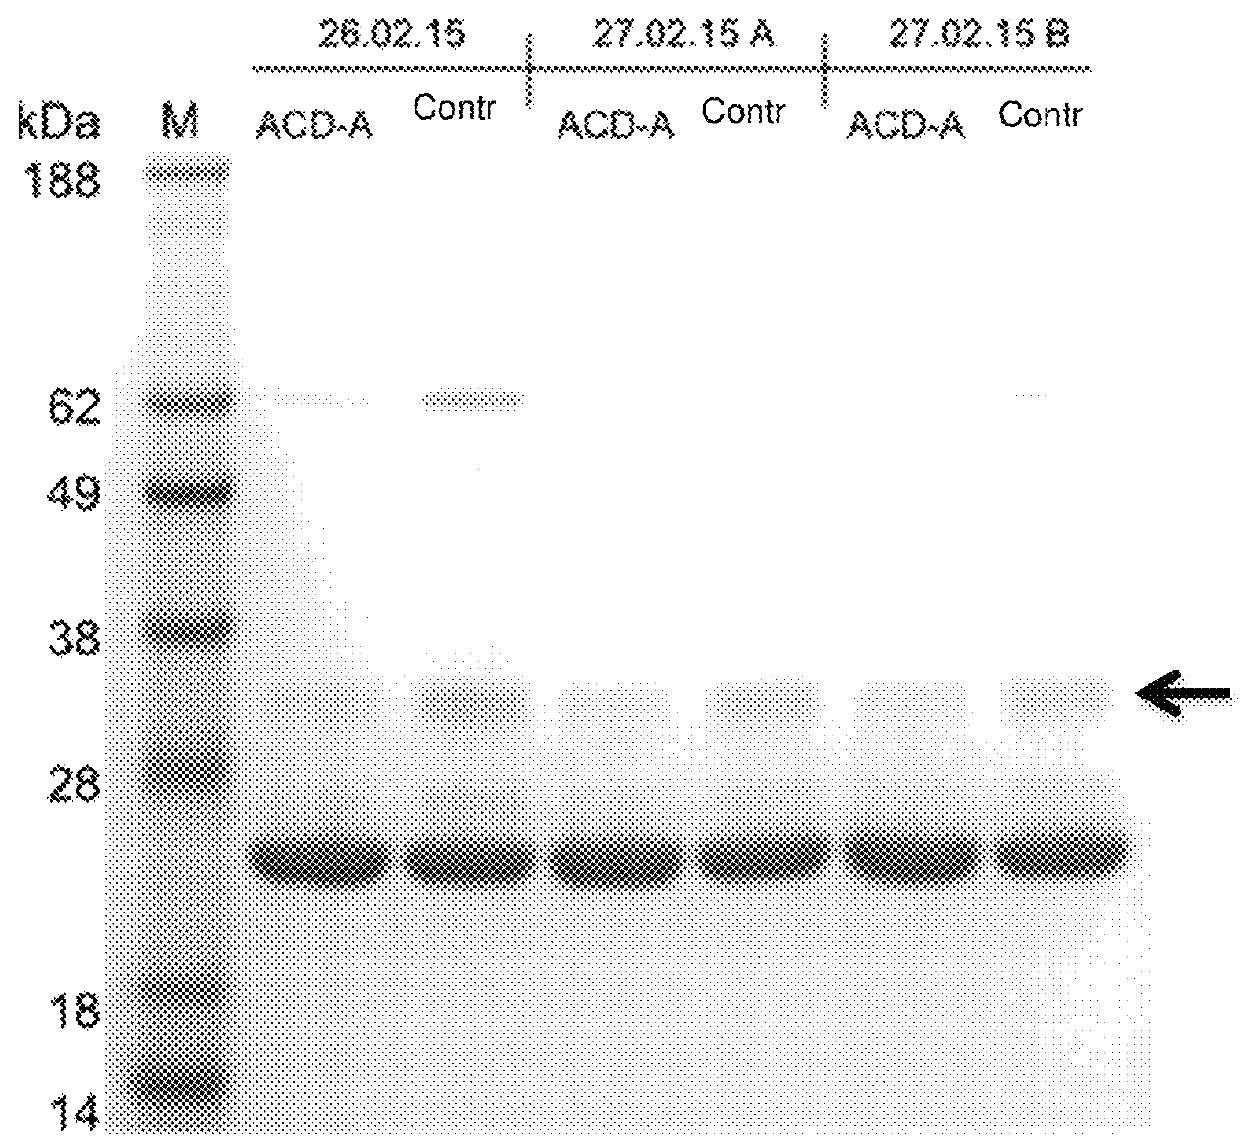 Use of citrate solution for affinity chromatographic purification of CRP using phosphocholine and derivatives thereof